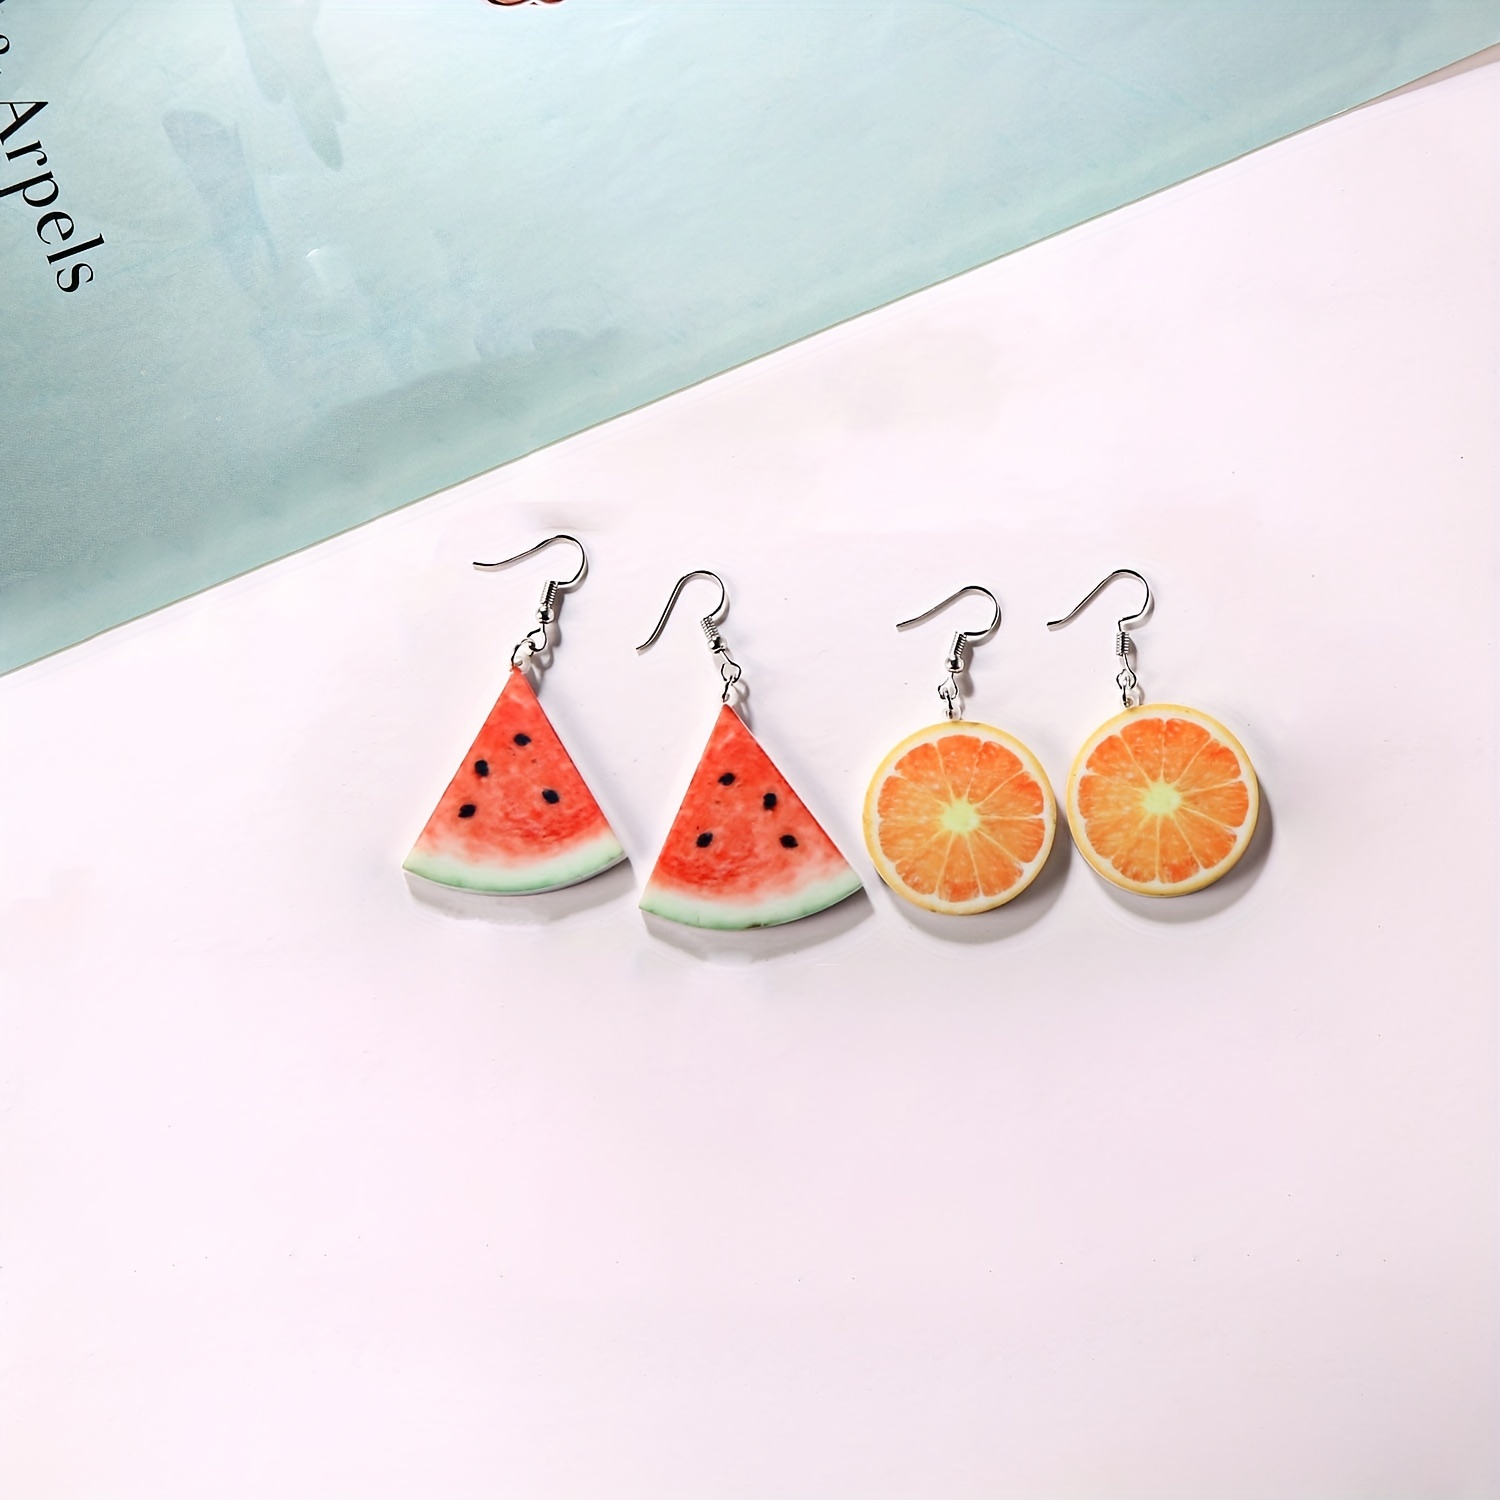 Random Styles 10Pcs 5 pairs Fruit Charms Bananas, watermelons, cherries,  etc For Earring Making Jewelry Accessories